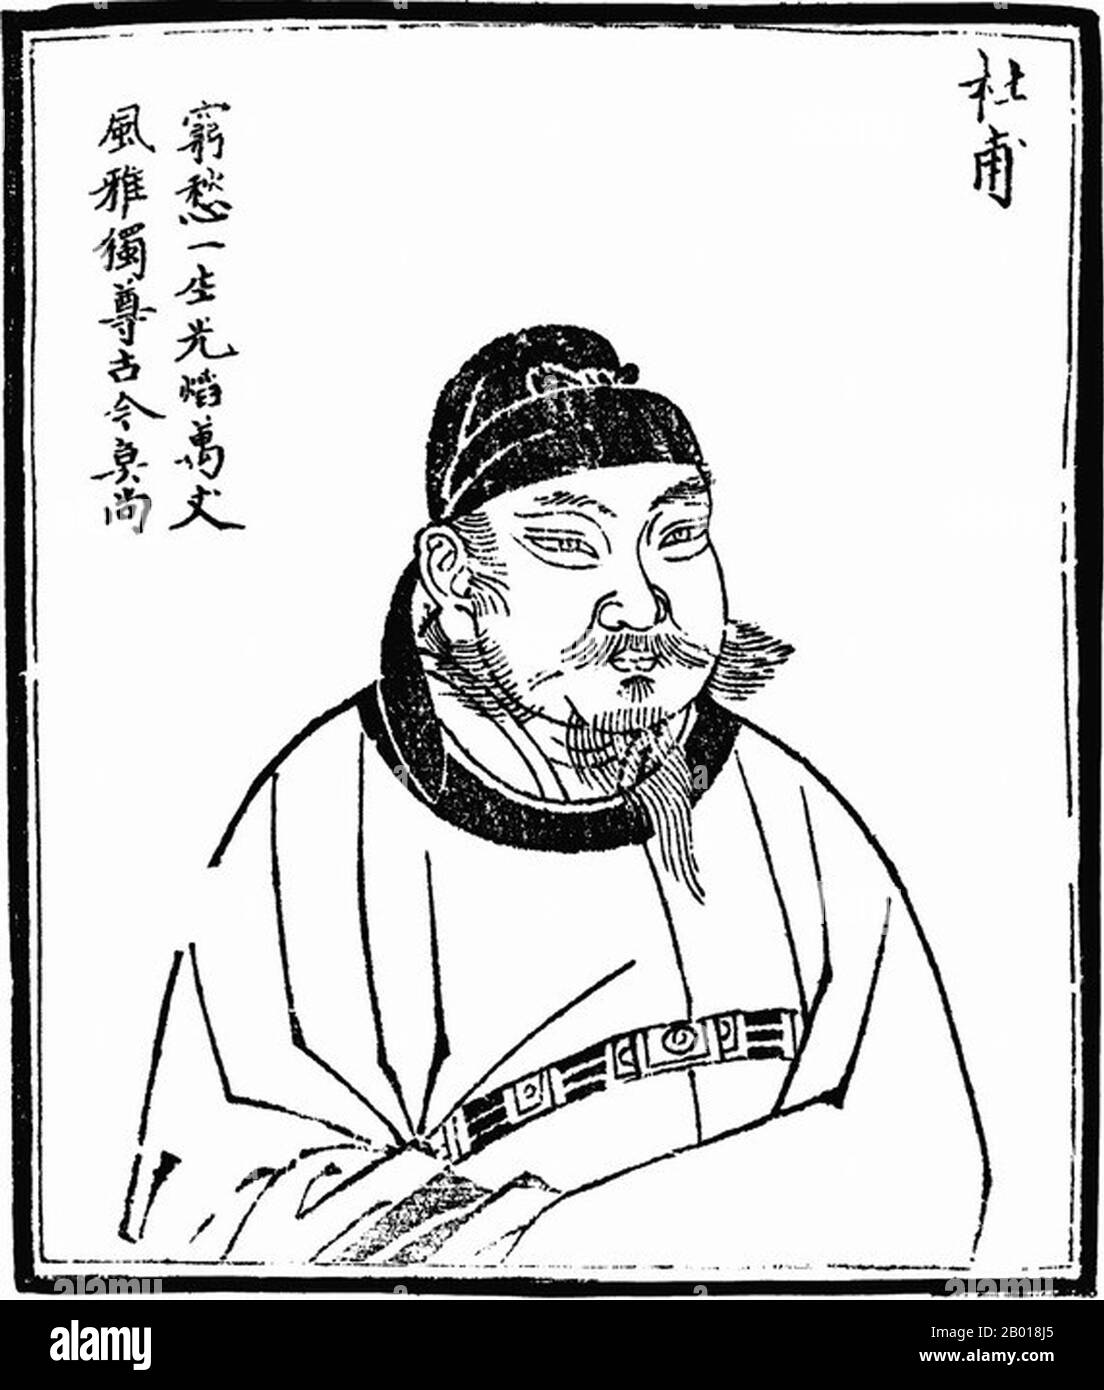 China: Du Fu (Tu Fu, 712-770), celebrated Tang Dynasty poet and historian. Woodblock print from 'Images of Ancient People in History', c. 1498.  Du Fu was a prominent Chinese poet of the Tang Dynasty. Along with Li Bai (Li Bo), he is frequently called the greatest of the Chinese poets. His greatest ambition was to serve his country as a successful civil servant, but he proved unable to make the necessary accommodations. His life, like the whole country, was devastated by the An Lushan Rebellion of 755, and his last 15 years were a time of almost constant unrest. Stock Photo